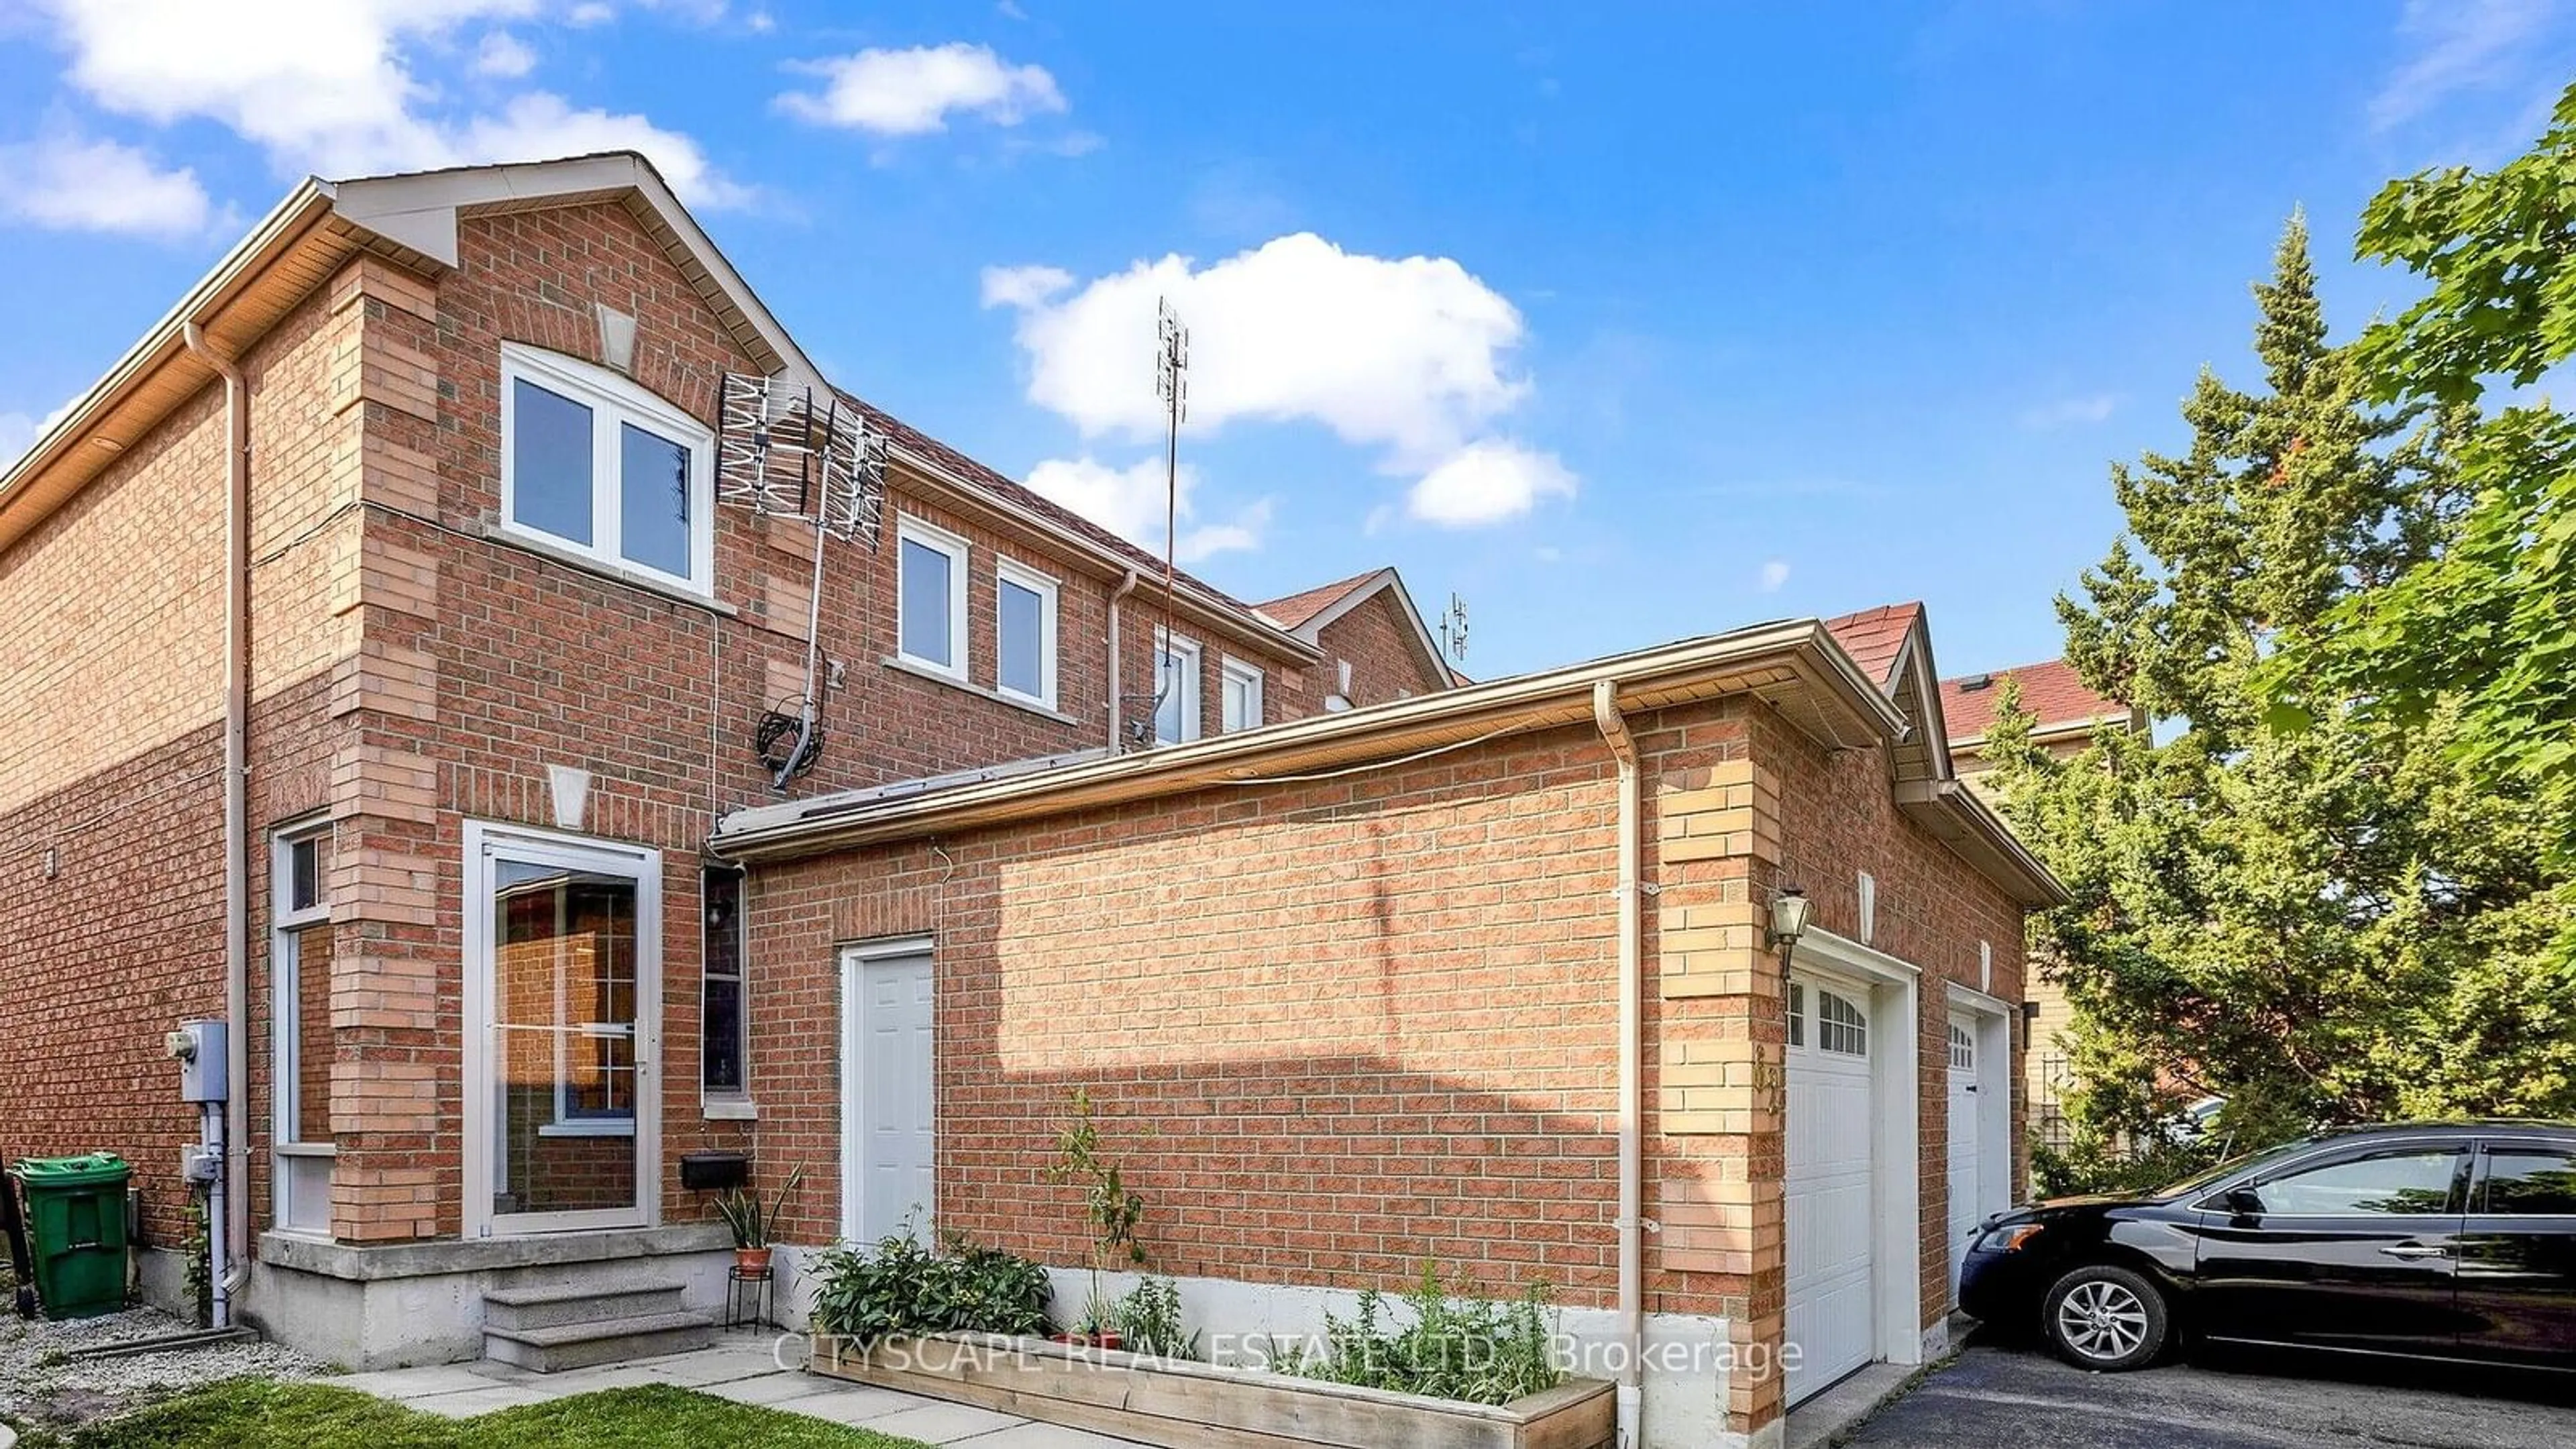 Home with brick exterior material for 62 herkes Dr, Brampton Ontario L6Y 4Z3